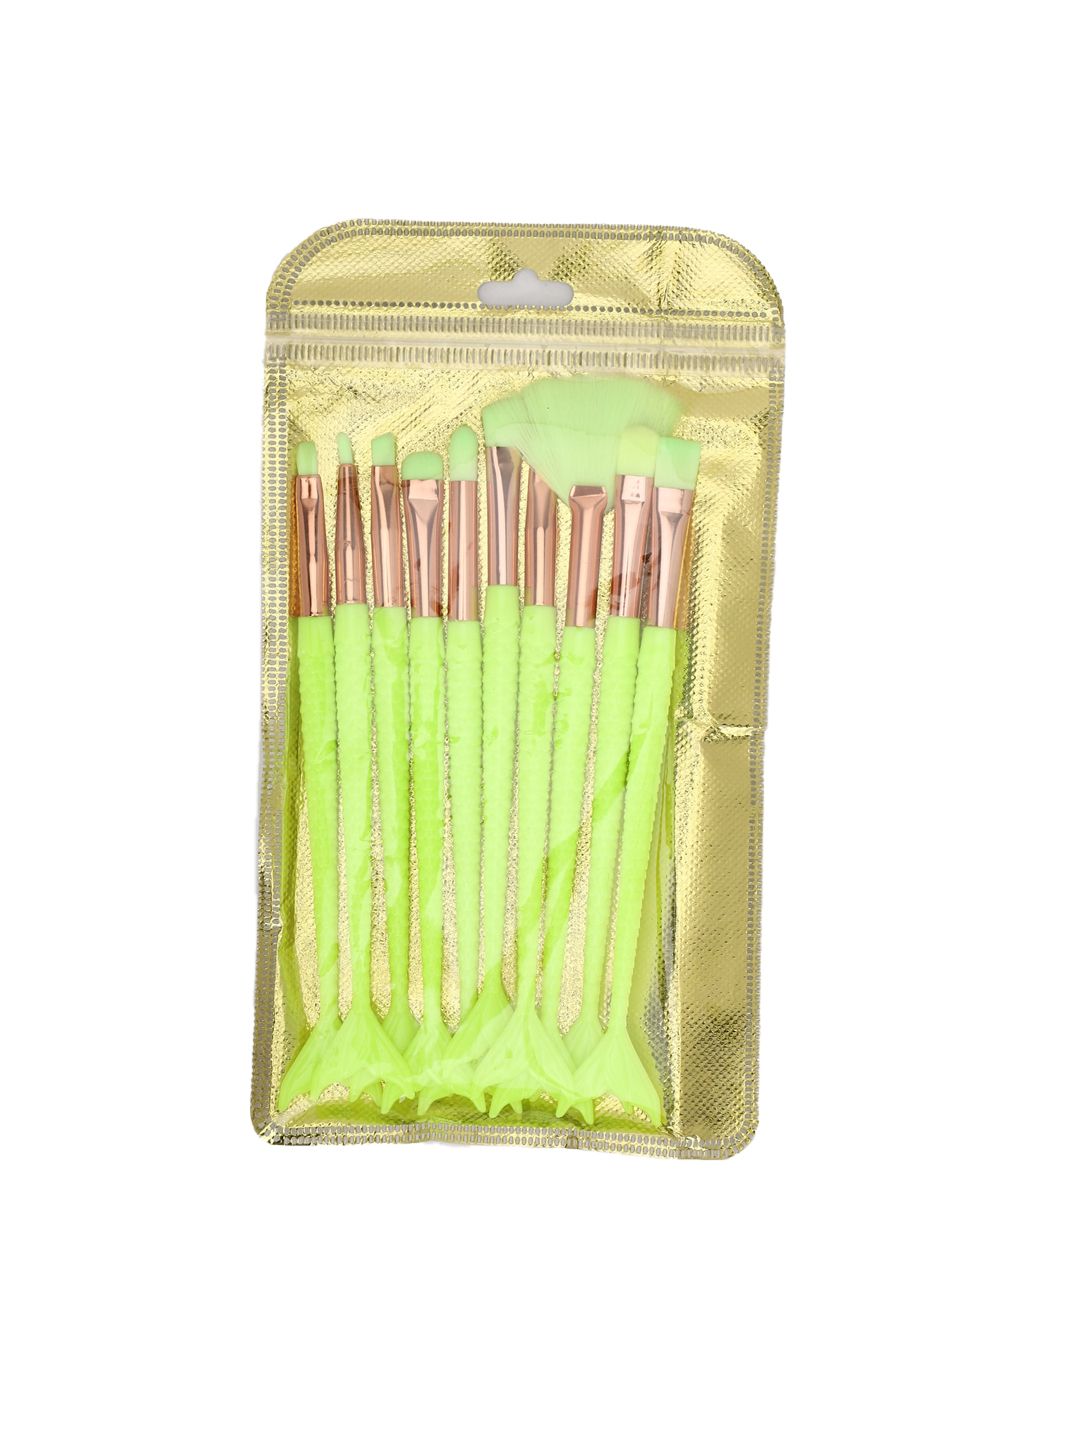 FOREVER 21 Set Of 10 Green Solid Cosmetic Face Brushes Price in India